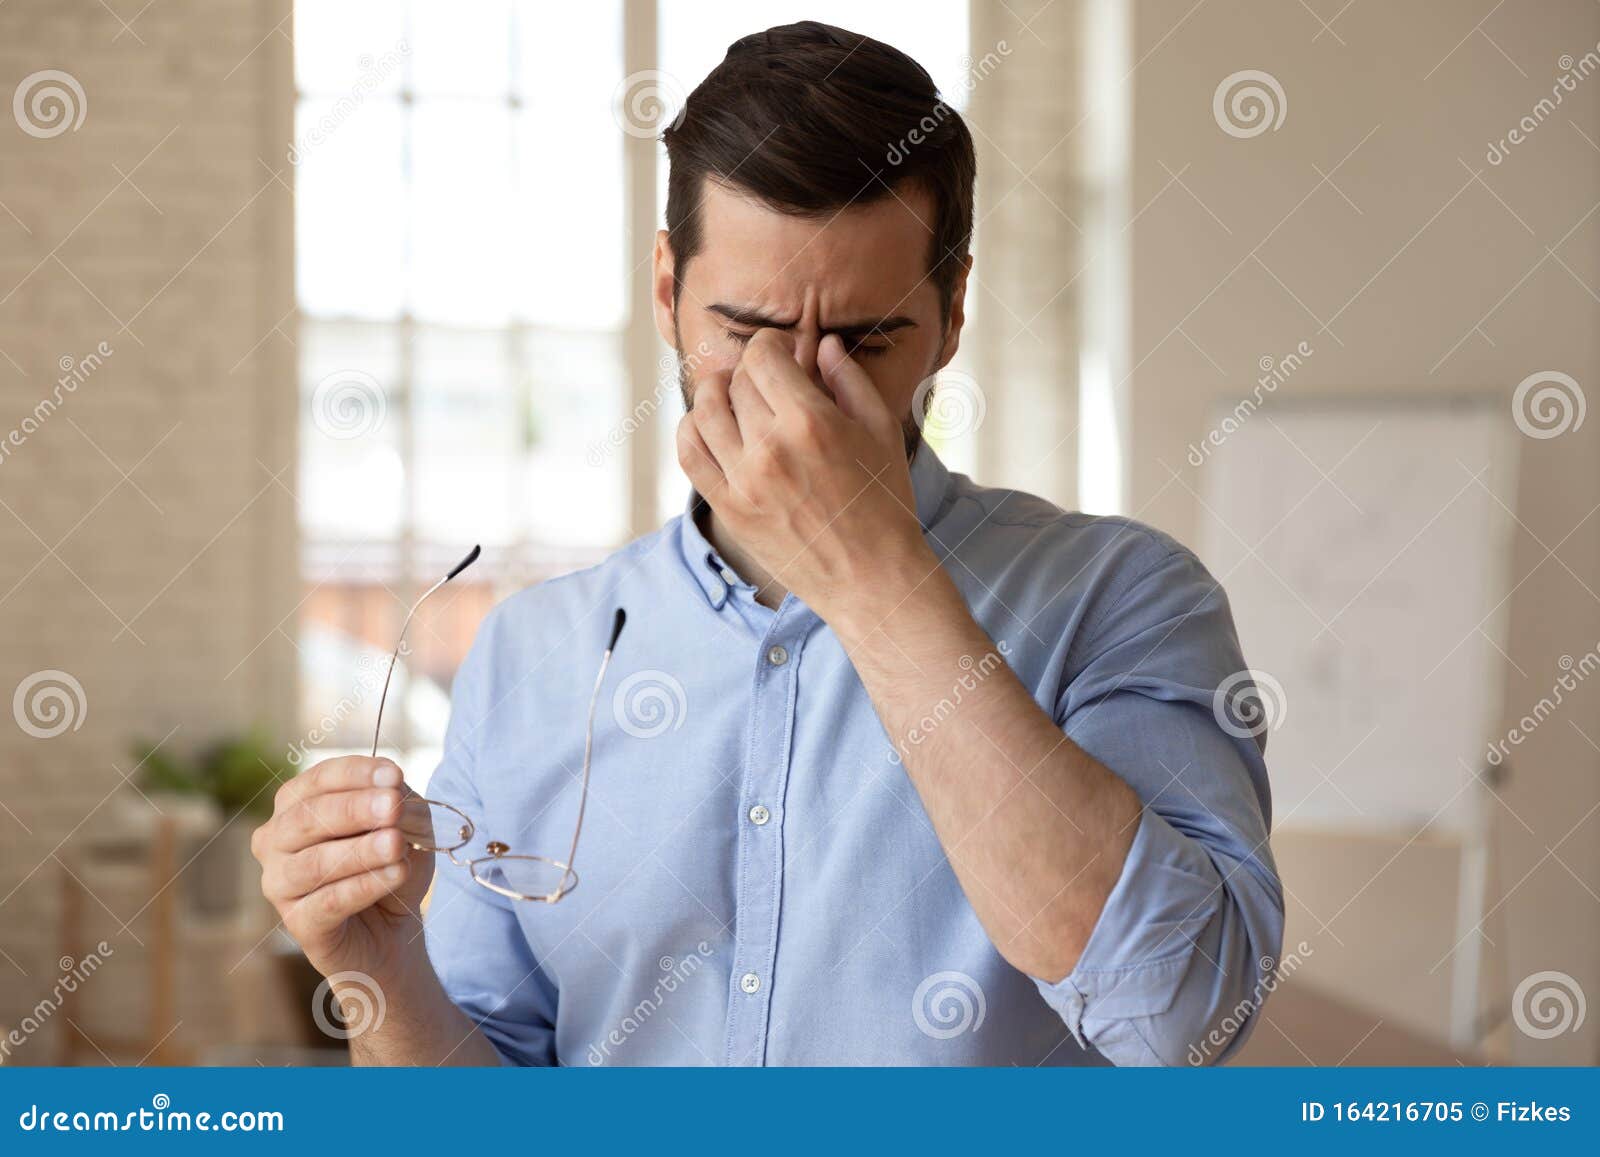 employee suffering from dry eyes syndrome or eyestrain.